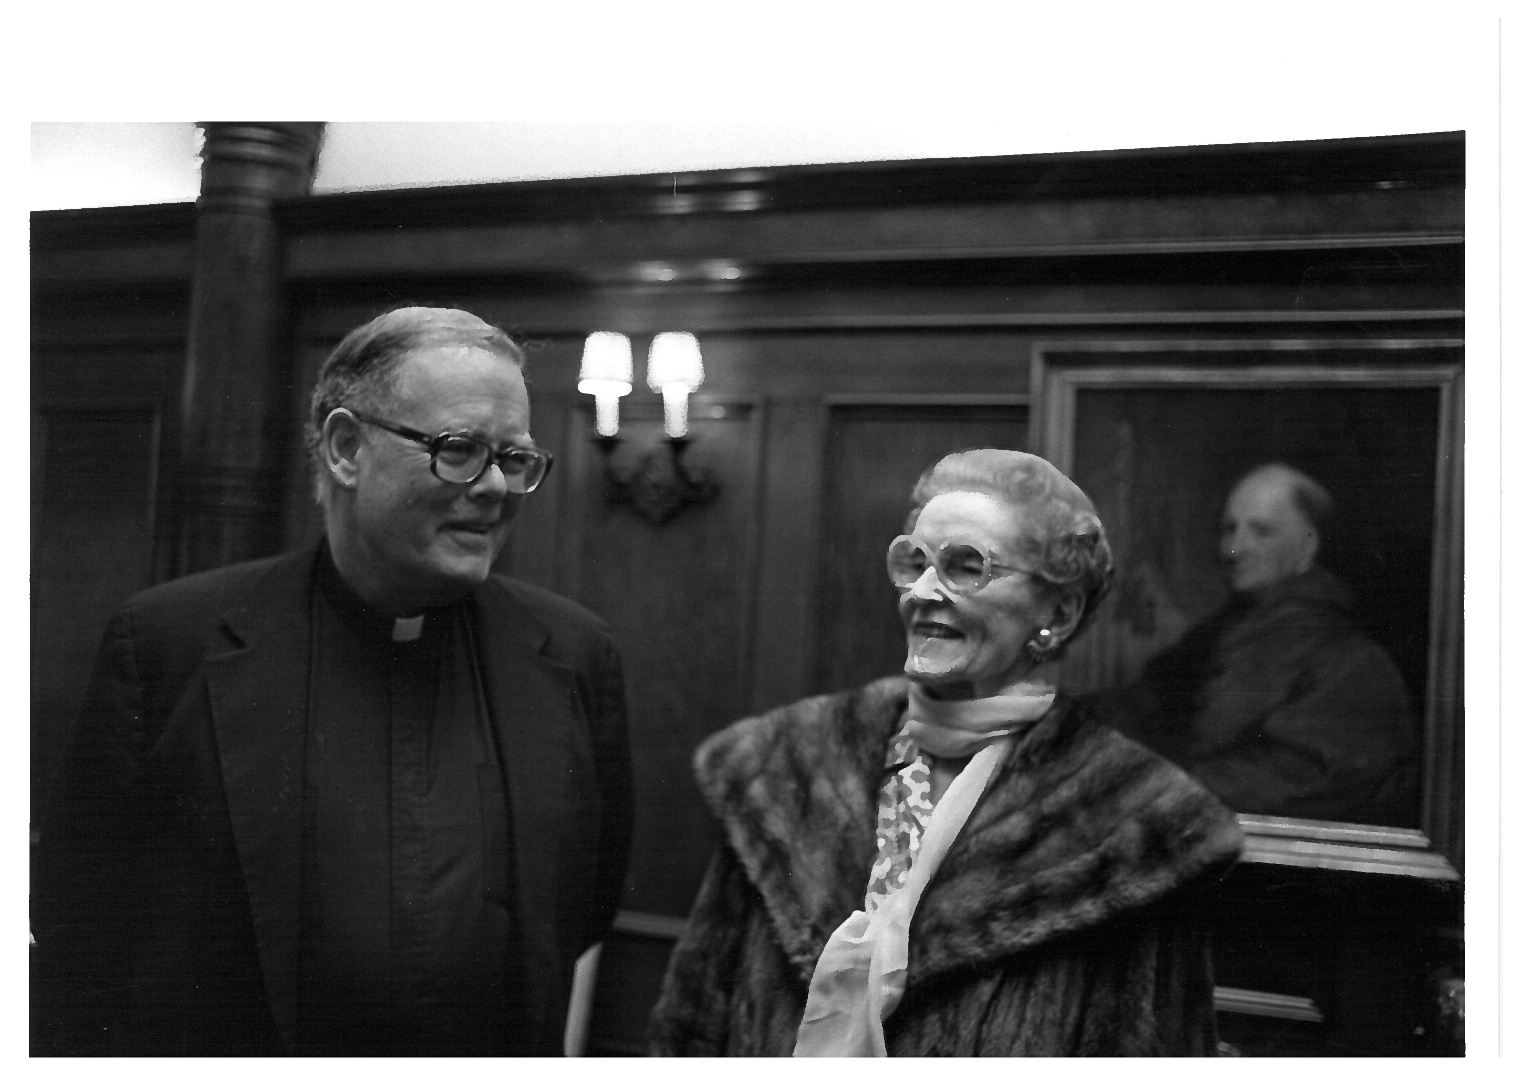 Rev. Timothy S. Healy, S.J. and Mrs. Rose Maguire Saul Zalles